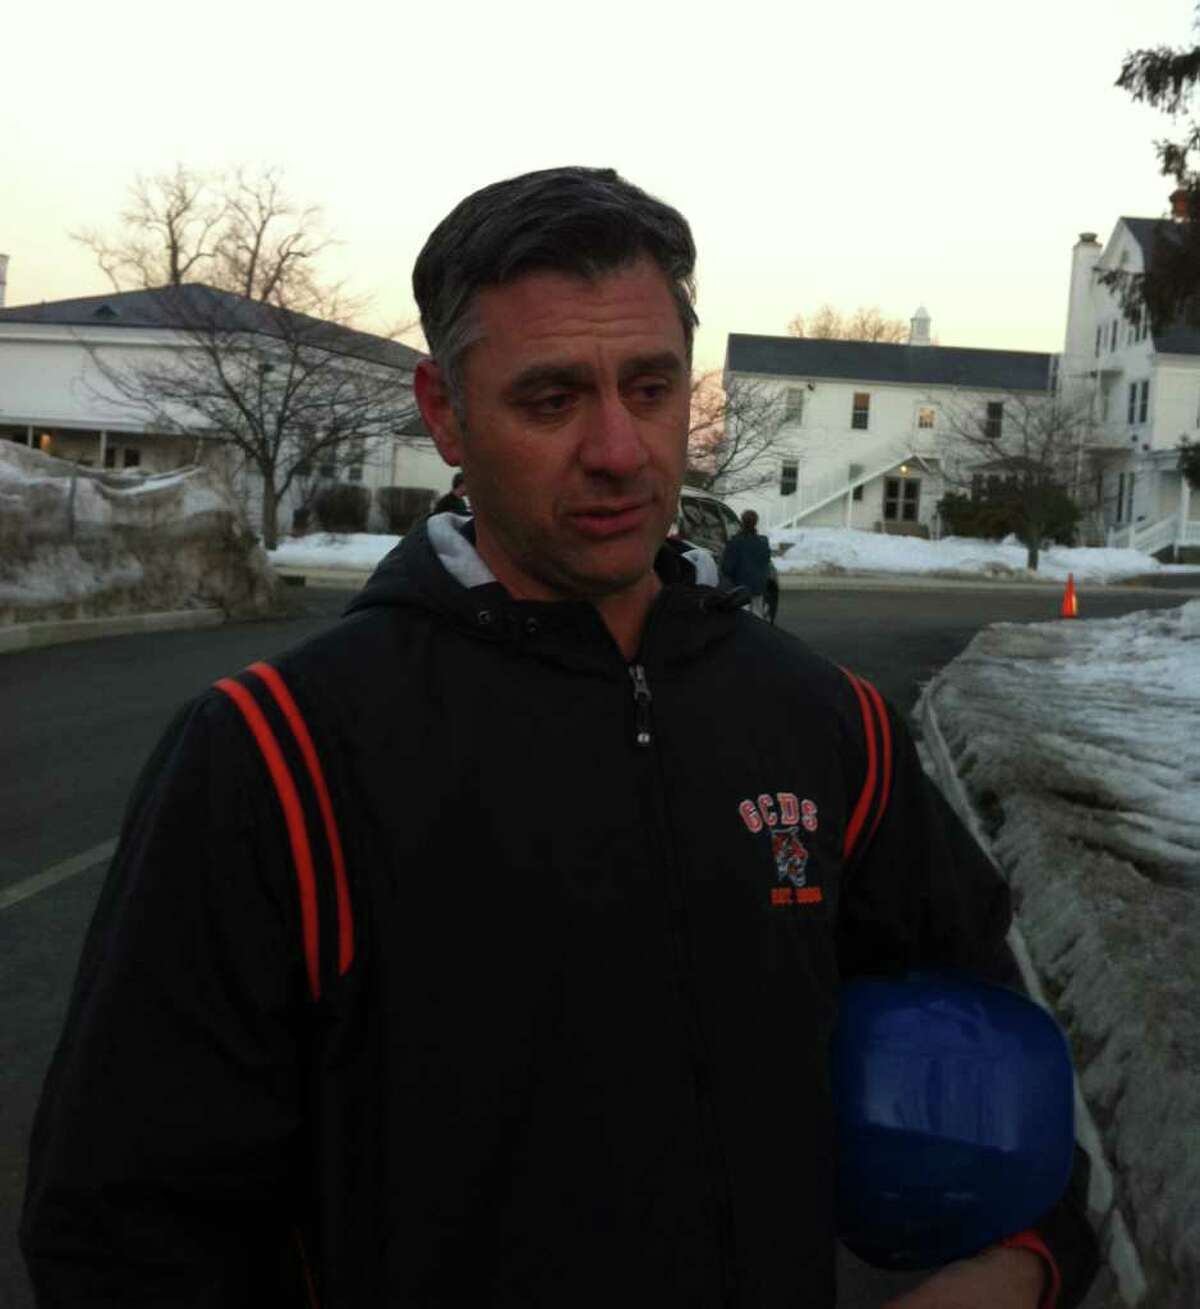 Greenwich Country Day School Headmaster Adam Rohdie at the school Friday evening, discussing a propane tank explosion and and fire that broke out in an under-construction performing arts center.